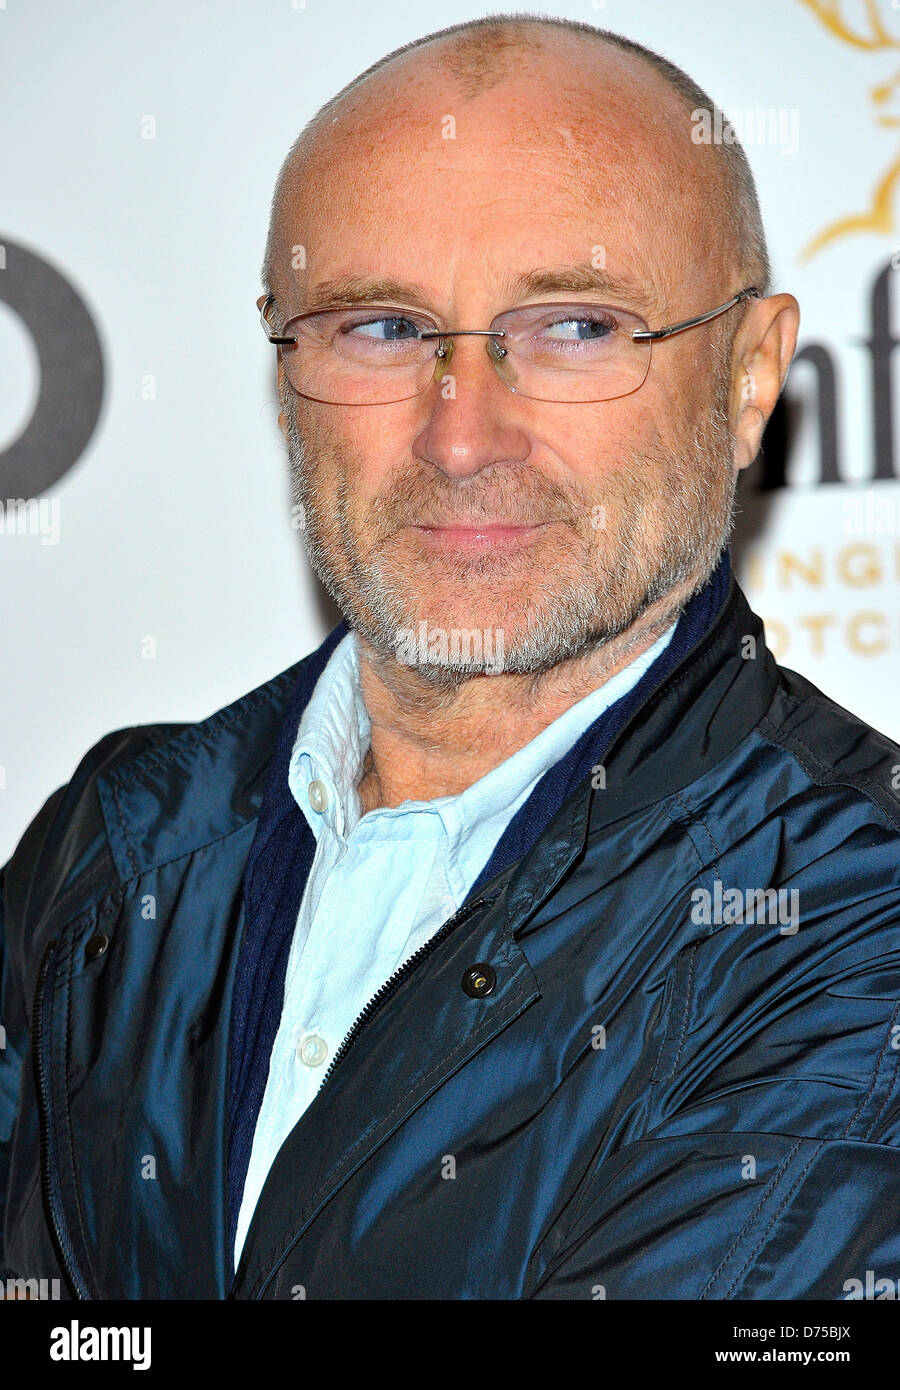 Phil Collins Glenfiddich Mojo Honours List 2011 Awards Ceremony, held at The Brewery - Arrivals London, England - 21.07.11 Stock Photo